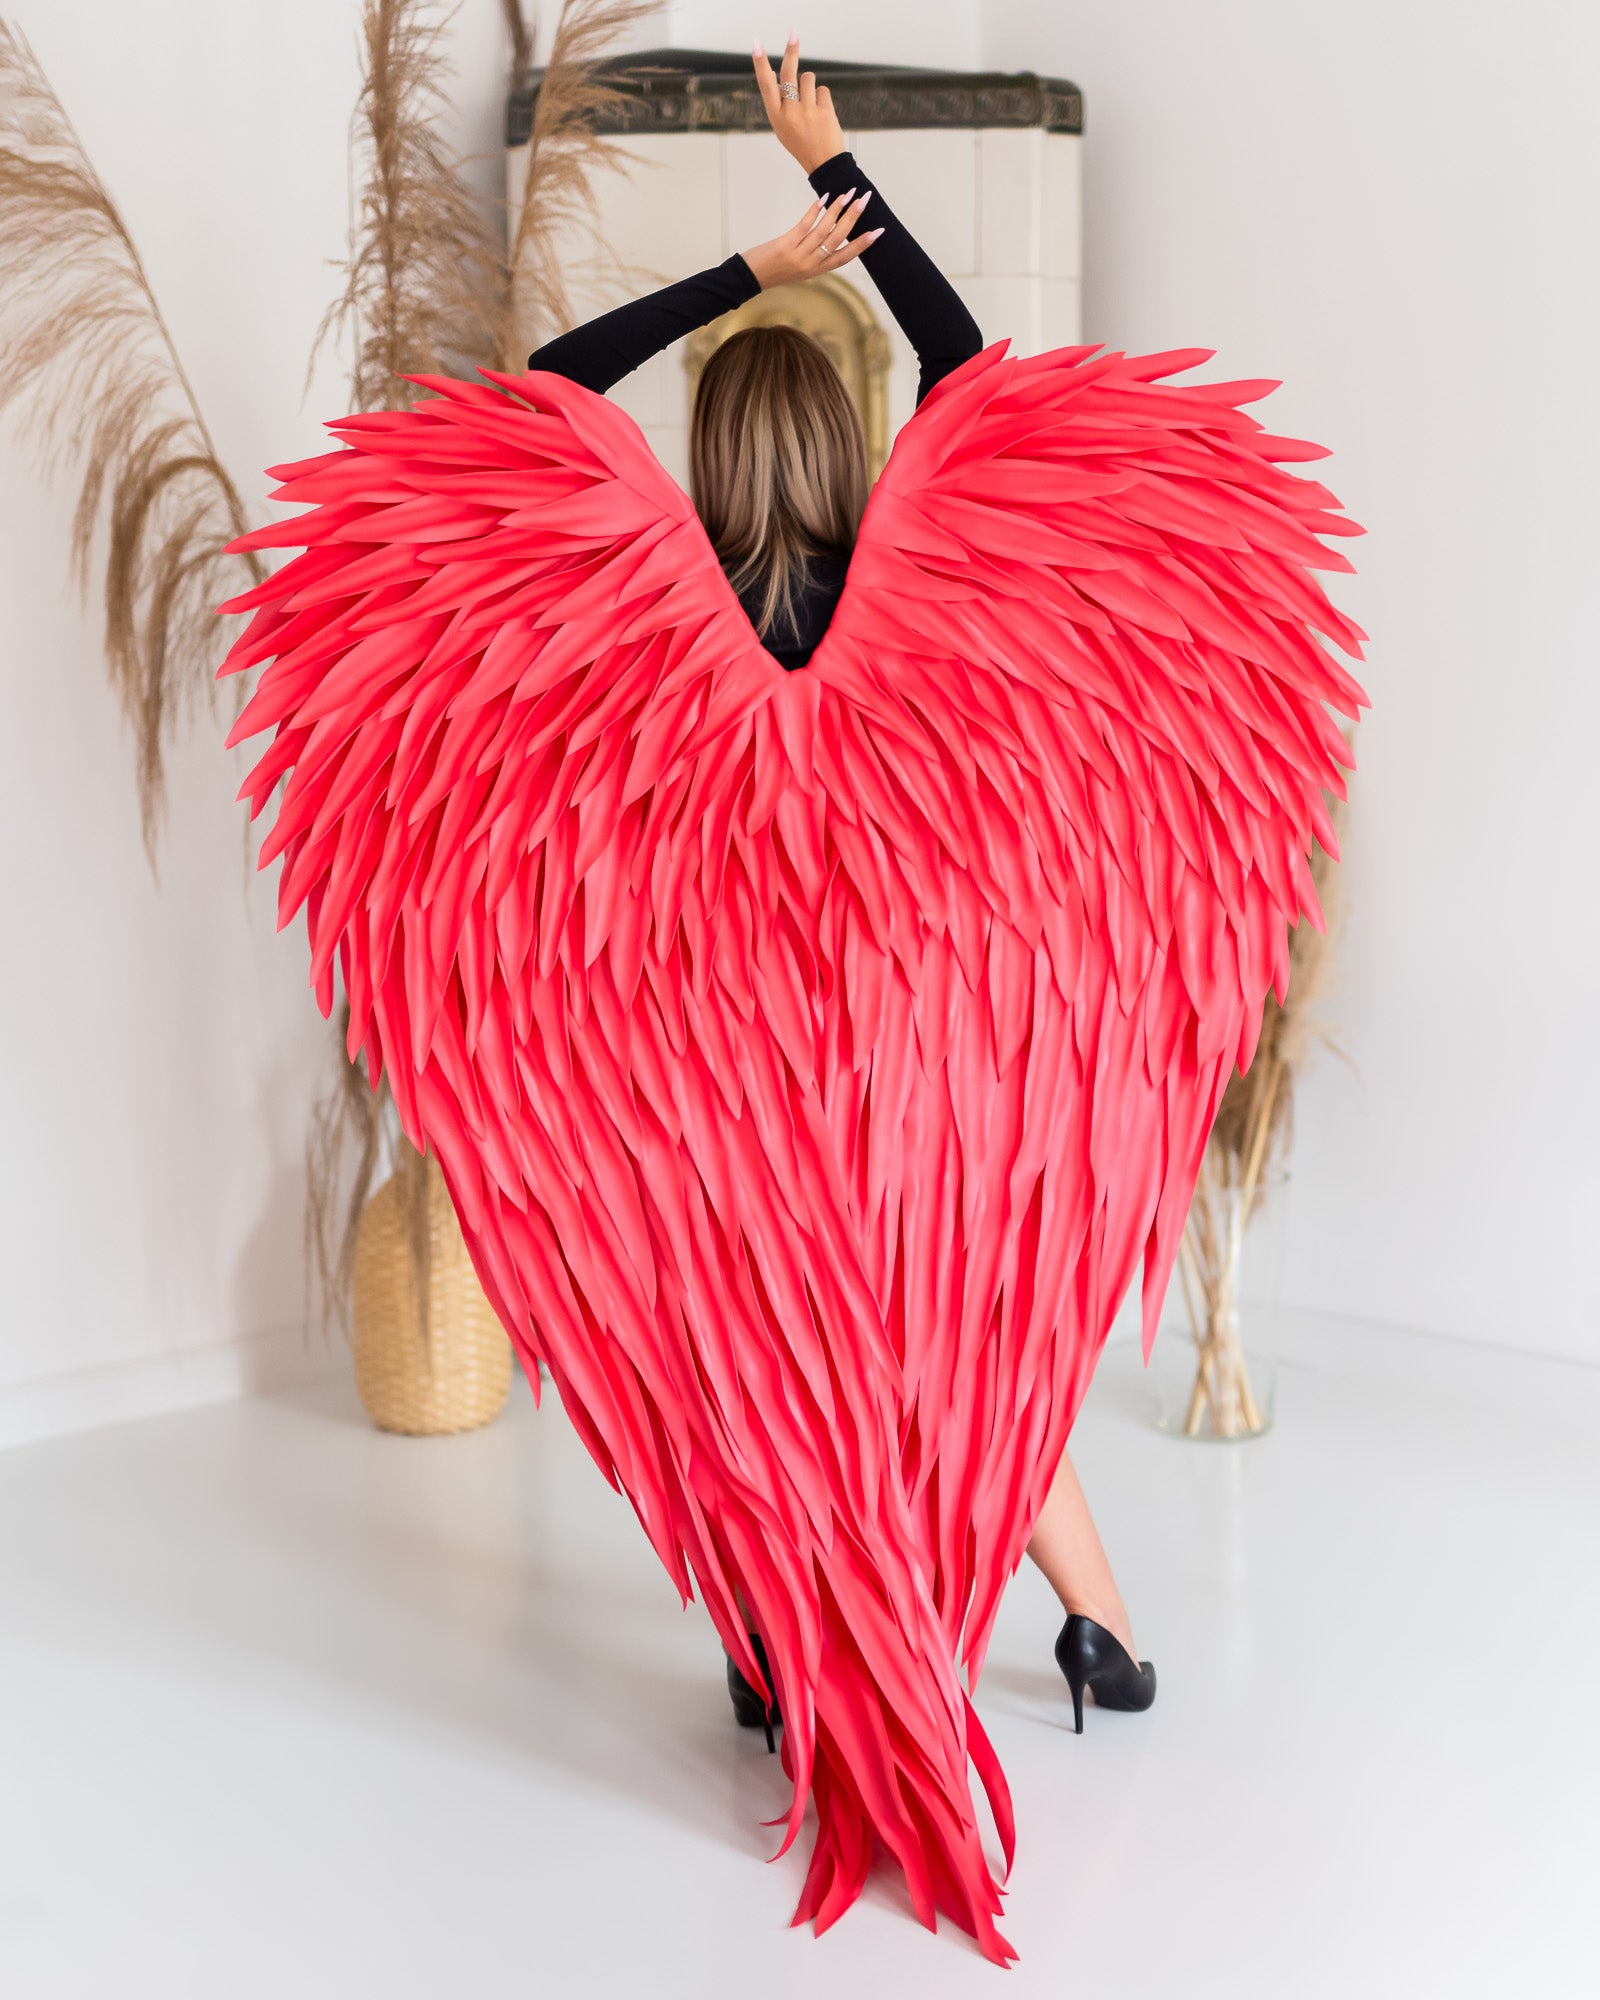 Red Angel Wings Sexy Costume for Foto Shoots 150cm/60in / Black